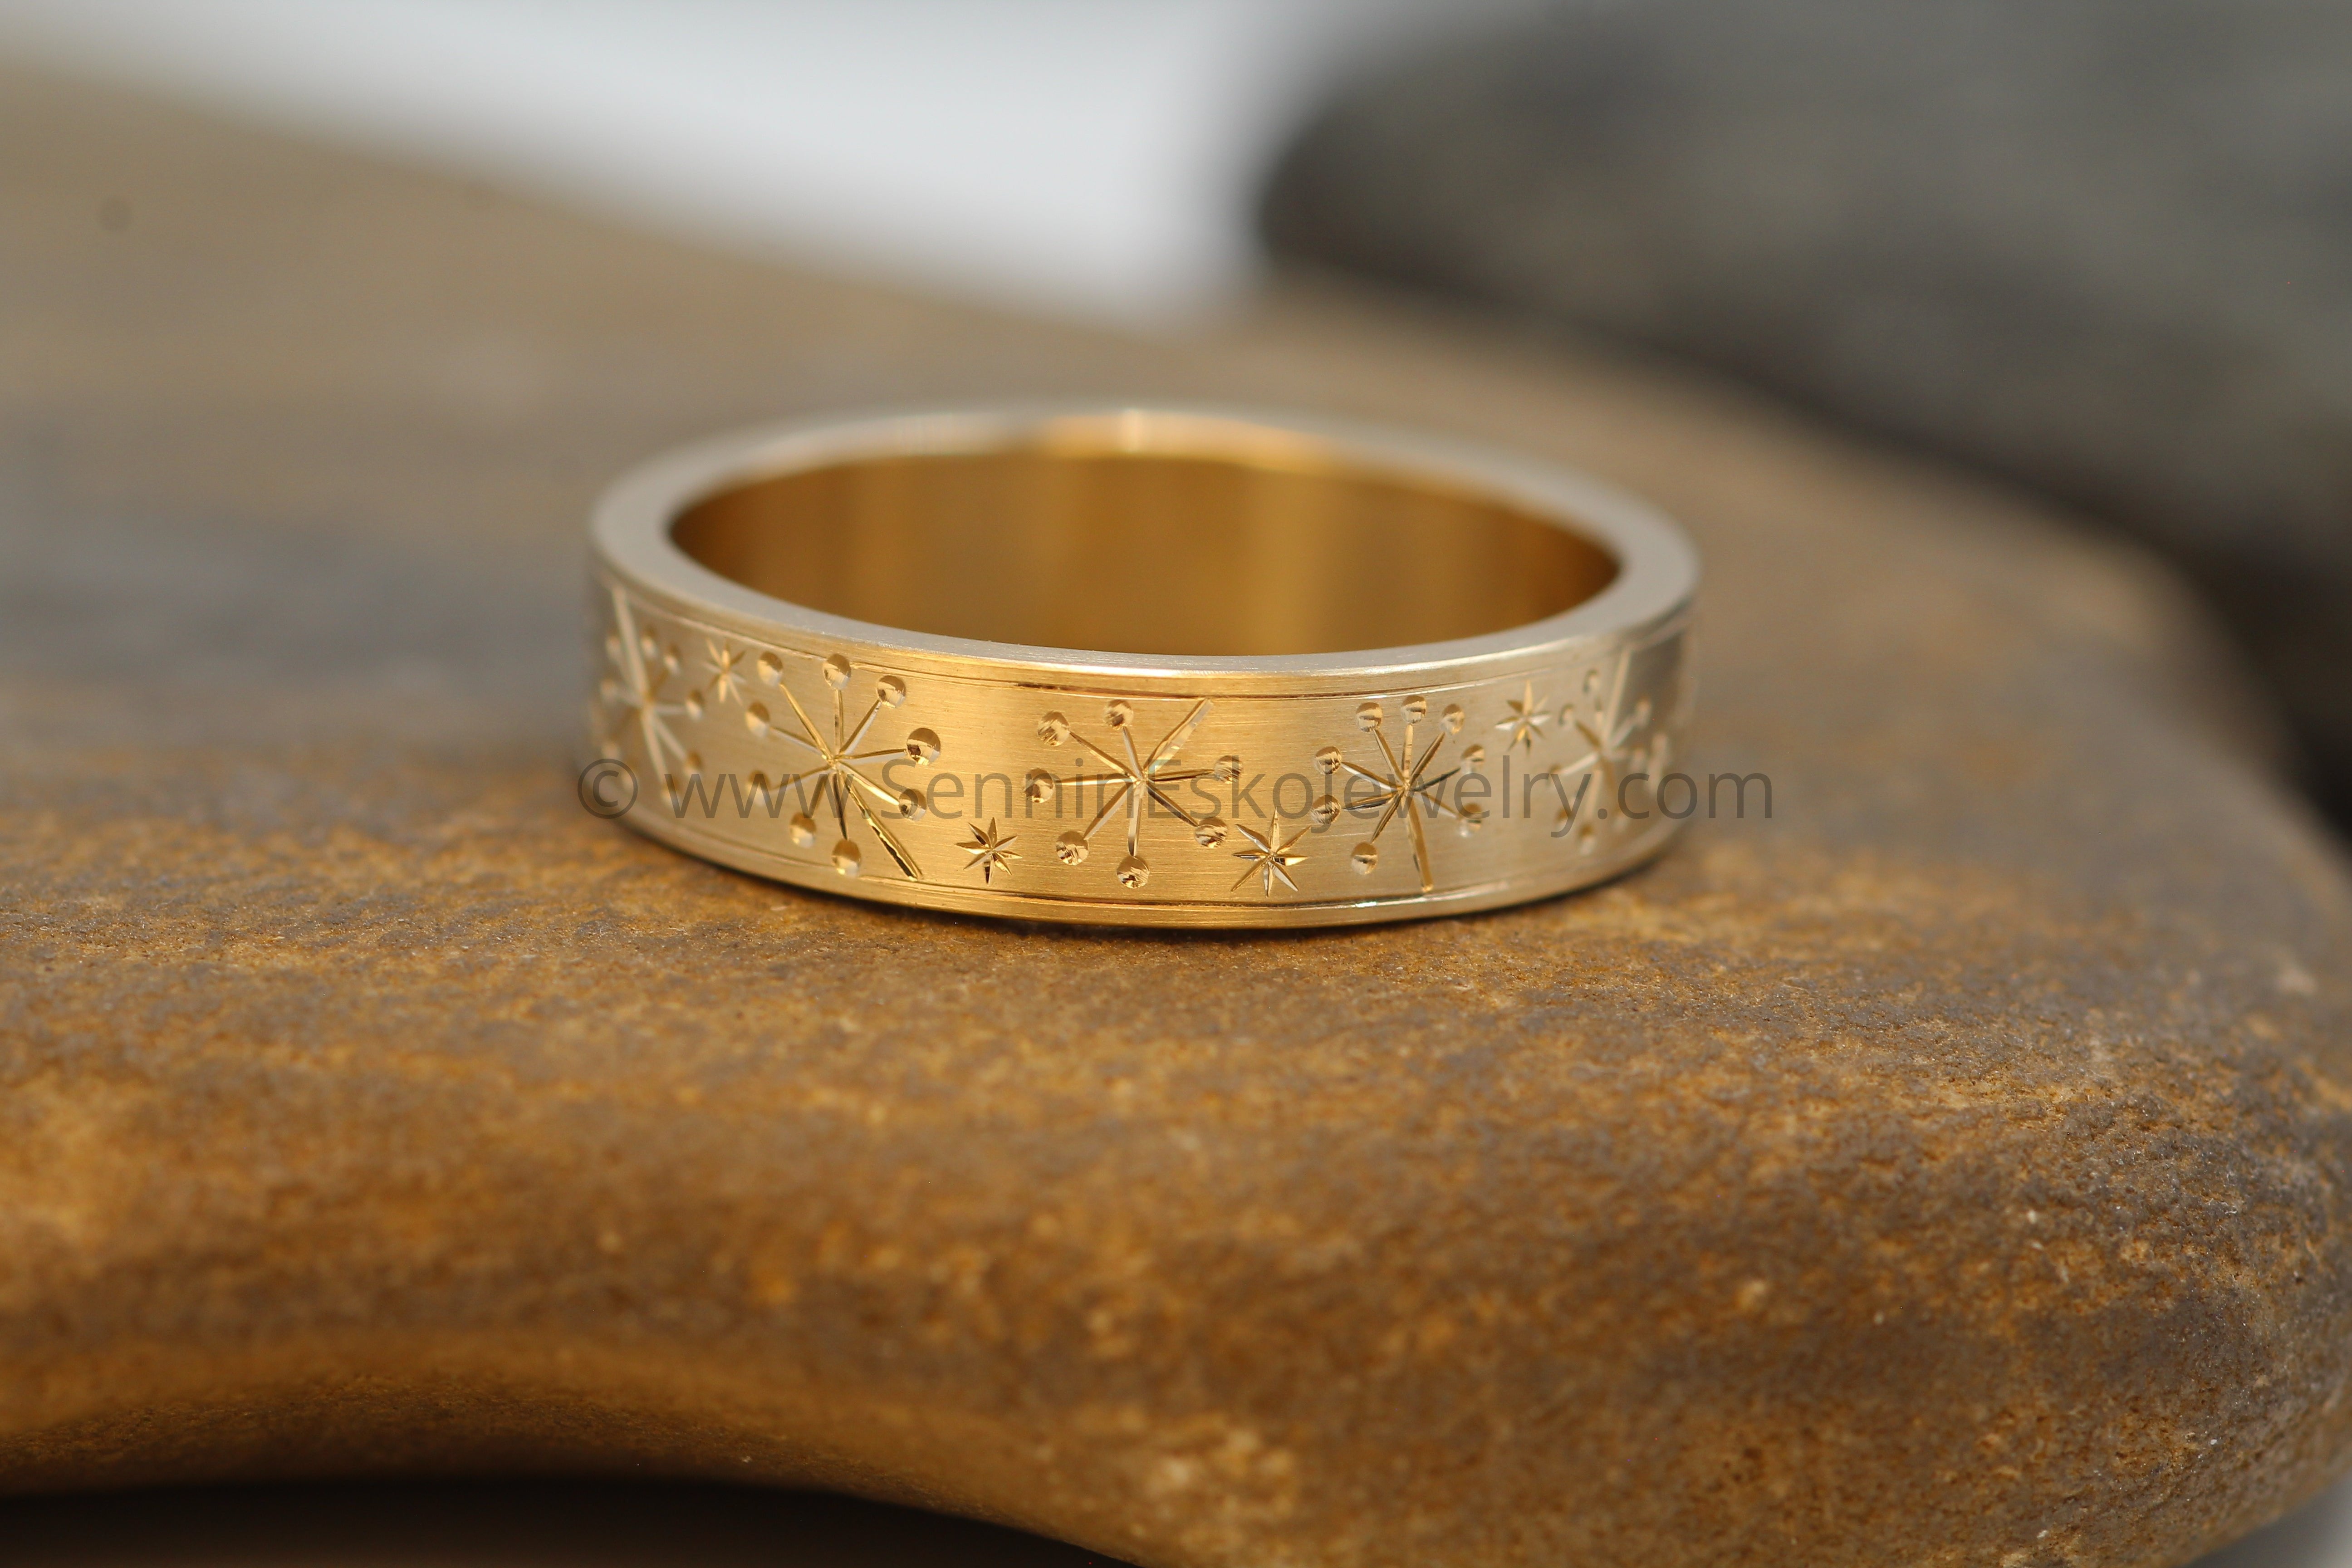 Wedding Ring Engraving Ideas for a Meaningful Inscription